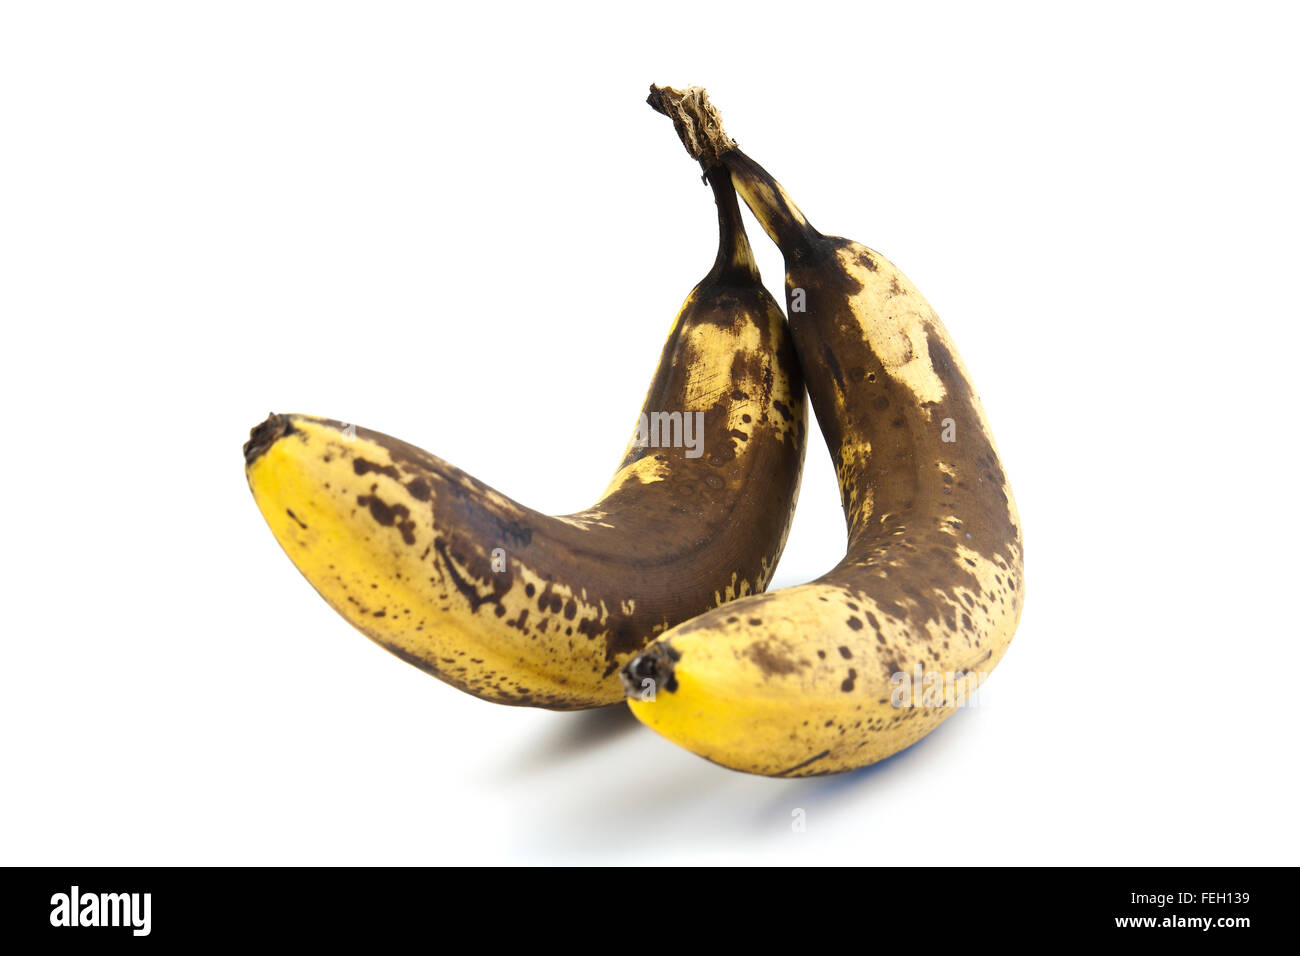 Two overripe bananas with large brown spots on a white background Stock Photo